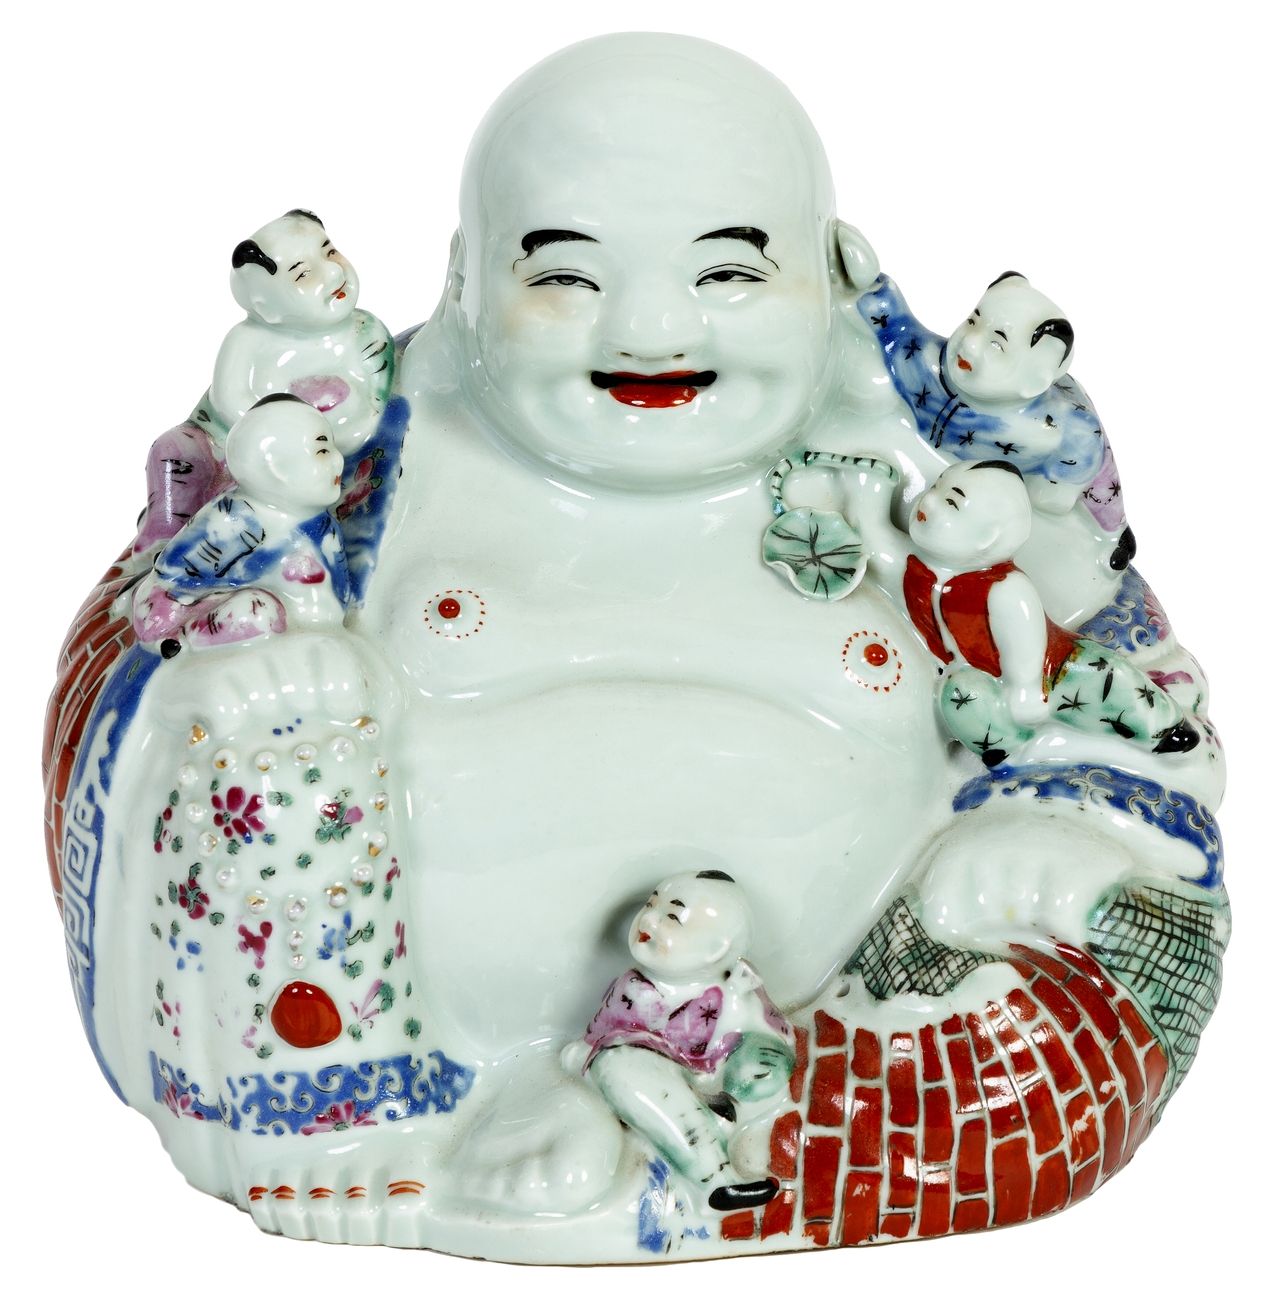 Null China, 19th - 20th century
Laughing Buddha in porcelain surrounded by five &hellip;